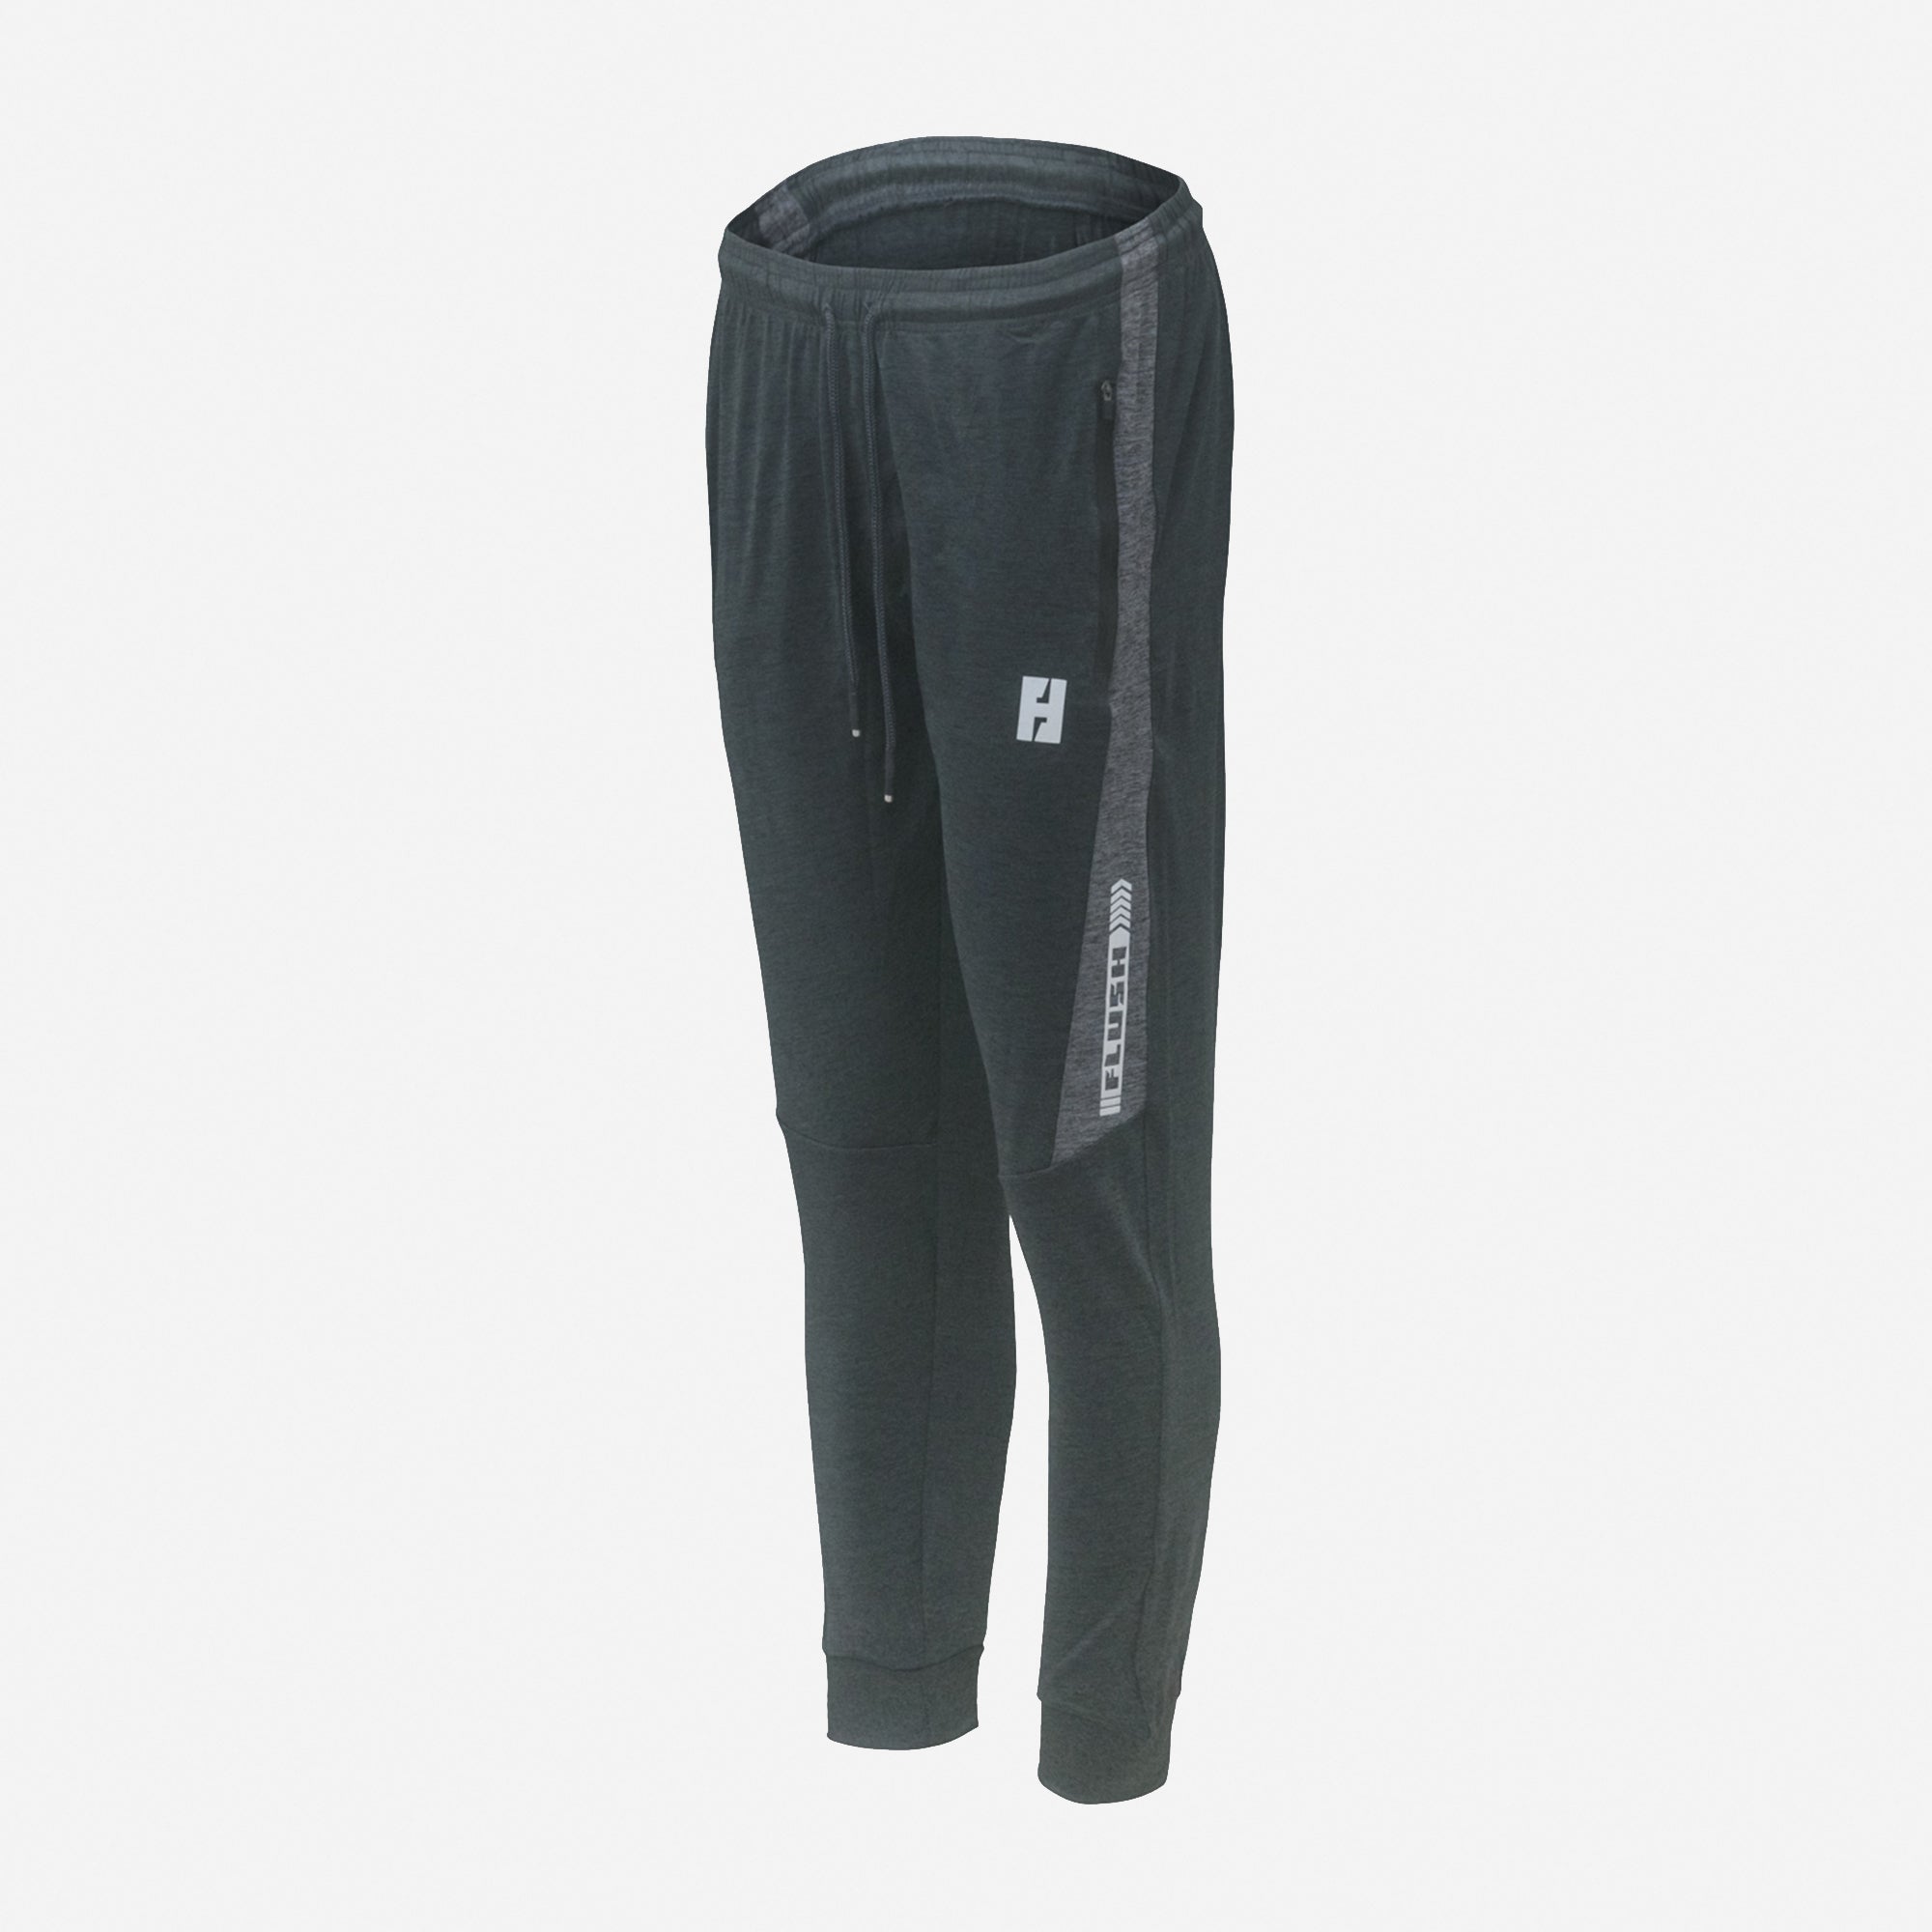 Sports Athletic Running UA Trouser With Secure Zipper